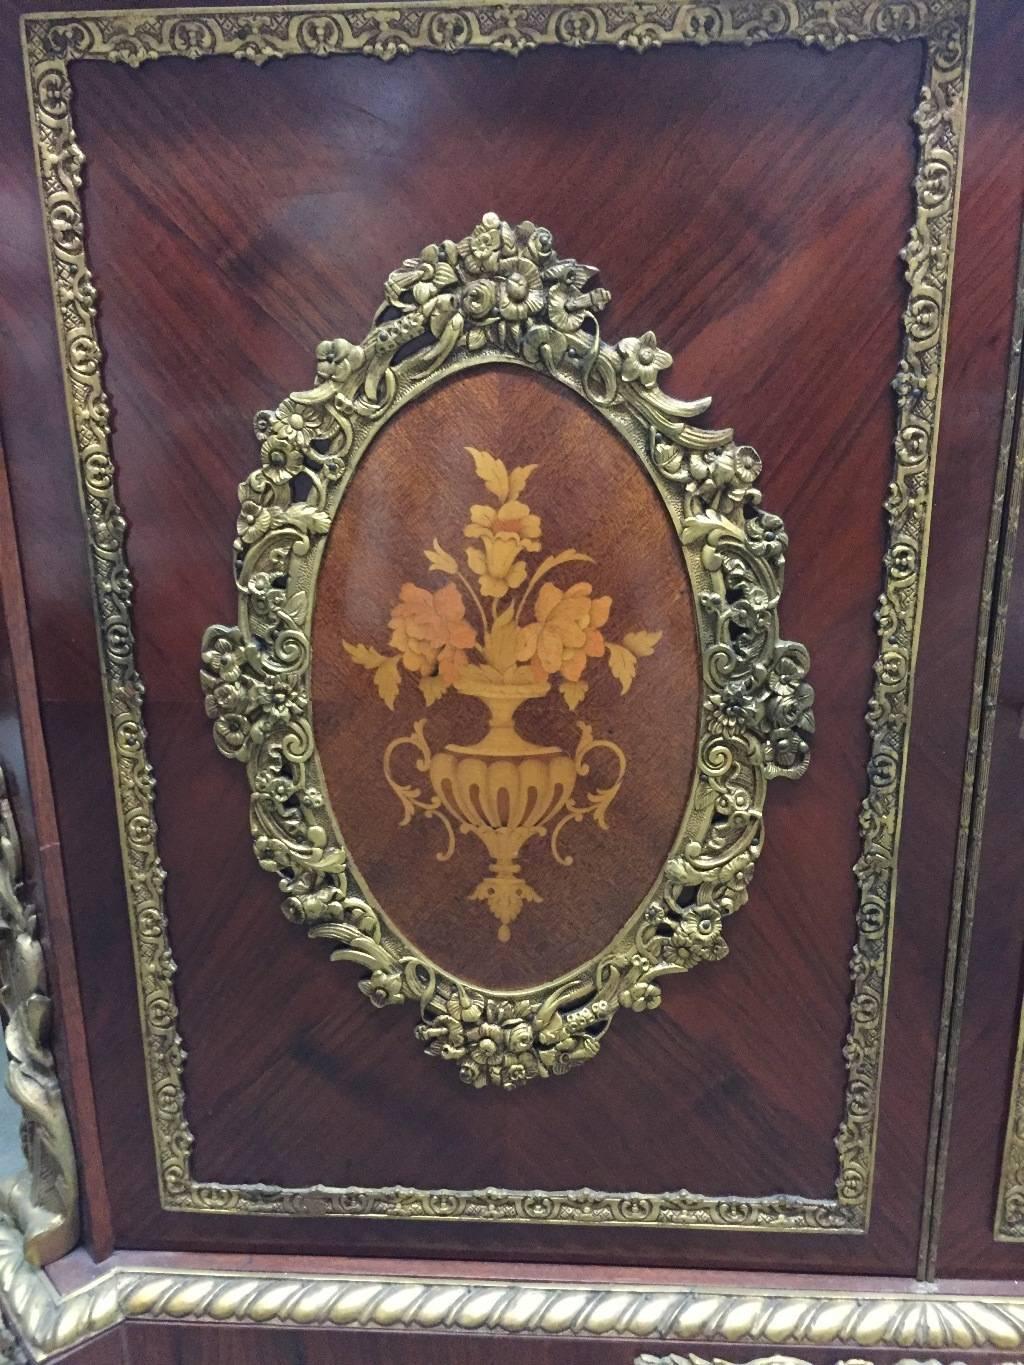 French ormolu-mounted marquetry two door credenza.
The marble top over a long drawer over two doors centered with oval medallion beautifully mounted with ormolu and fine inlay. Sides are mounted with further bronze mounts and inlay, all supported